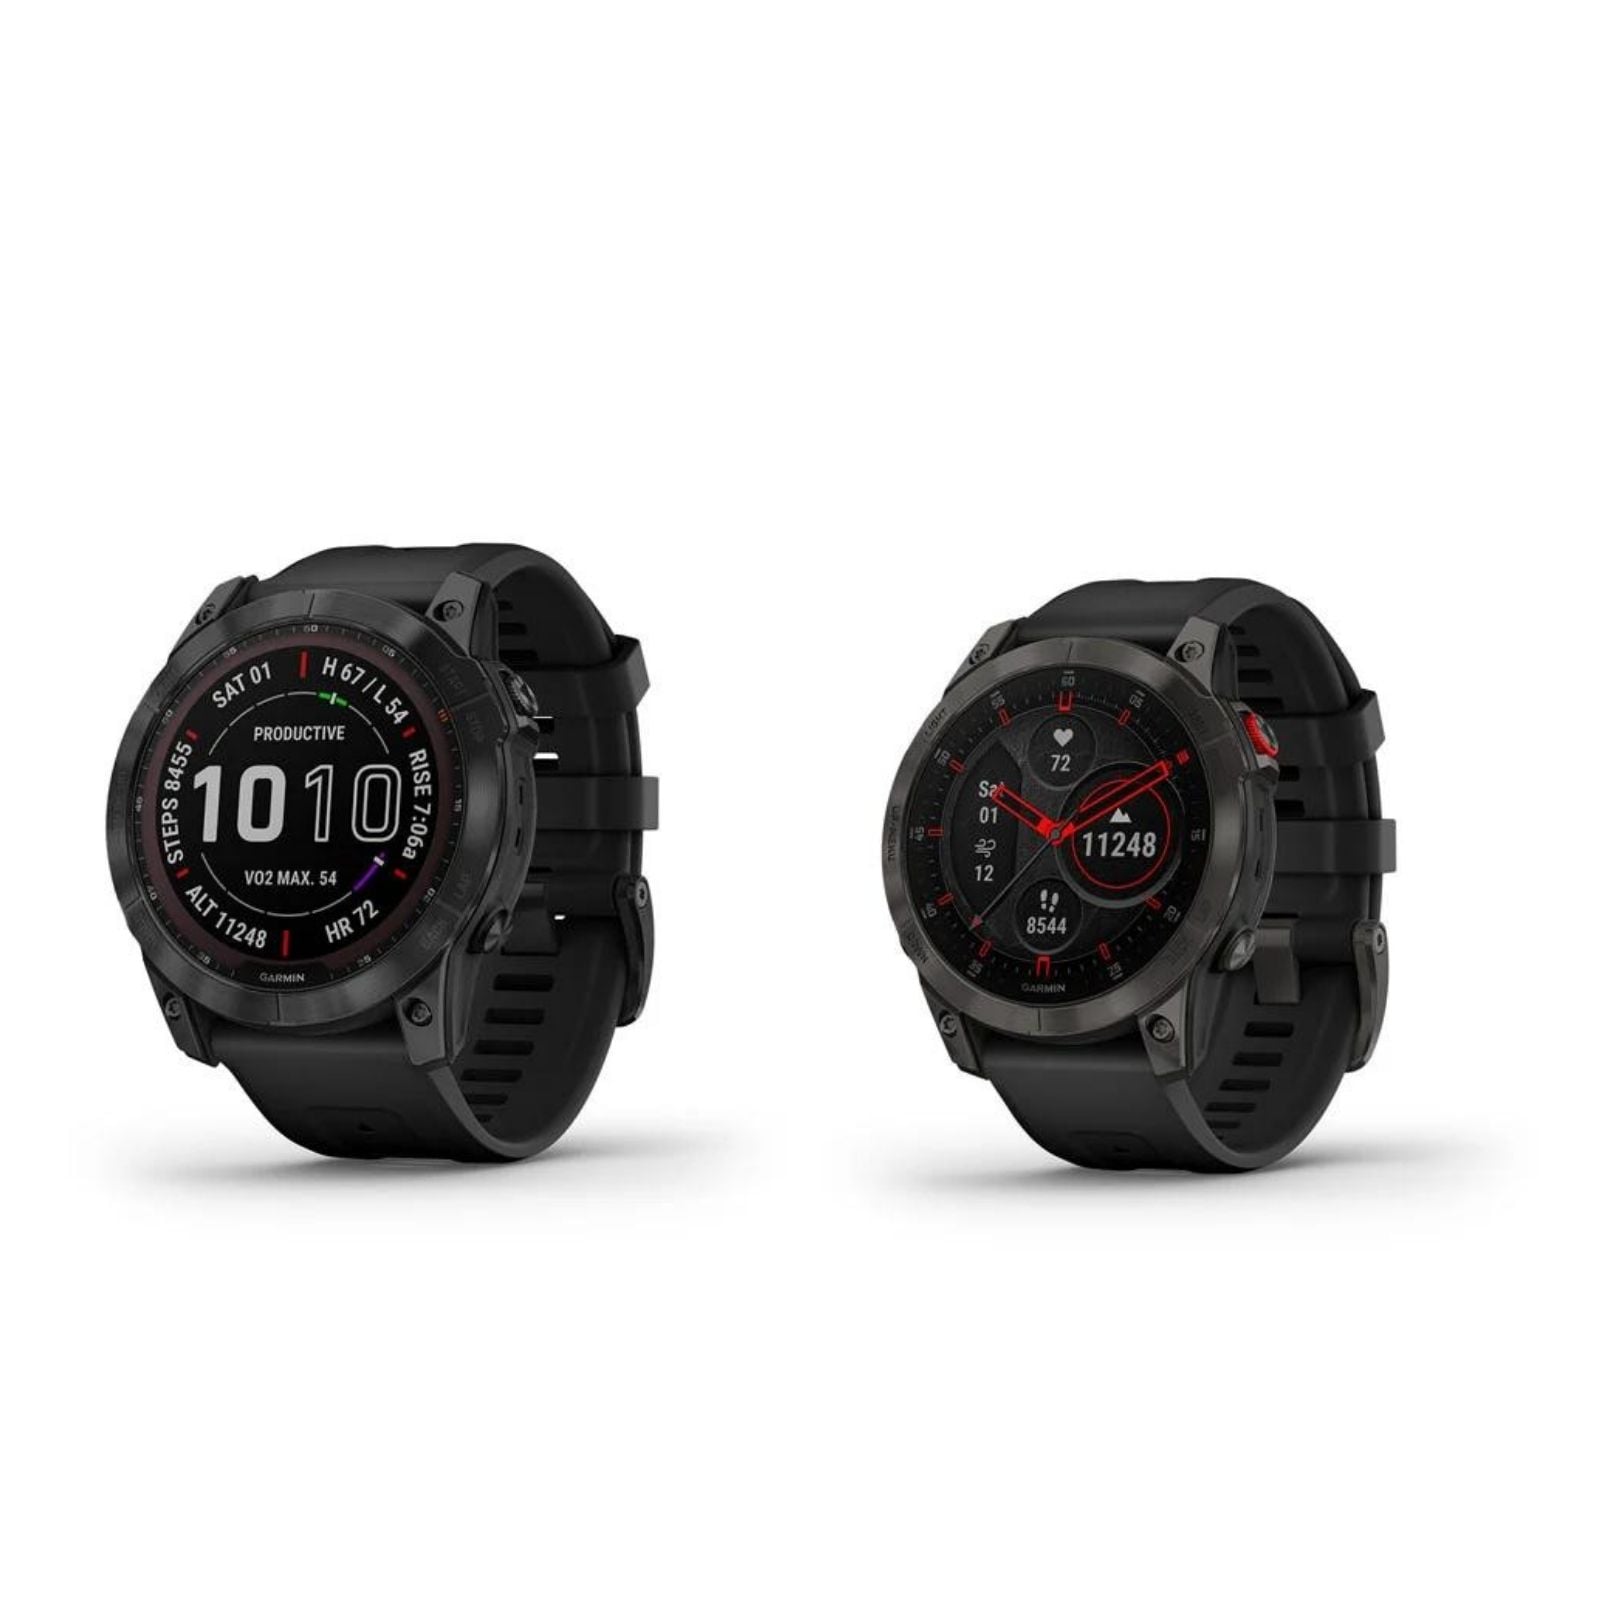 Garmin Fenix 7 series launched in India, price starts at Rs 67,990